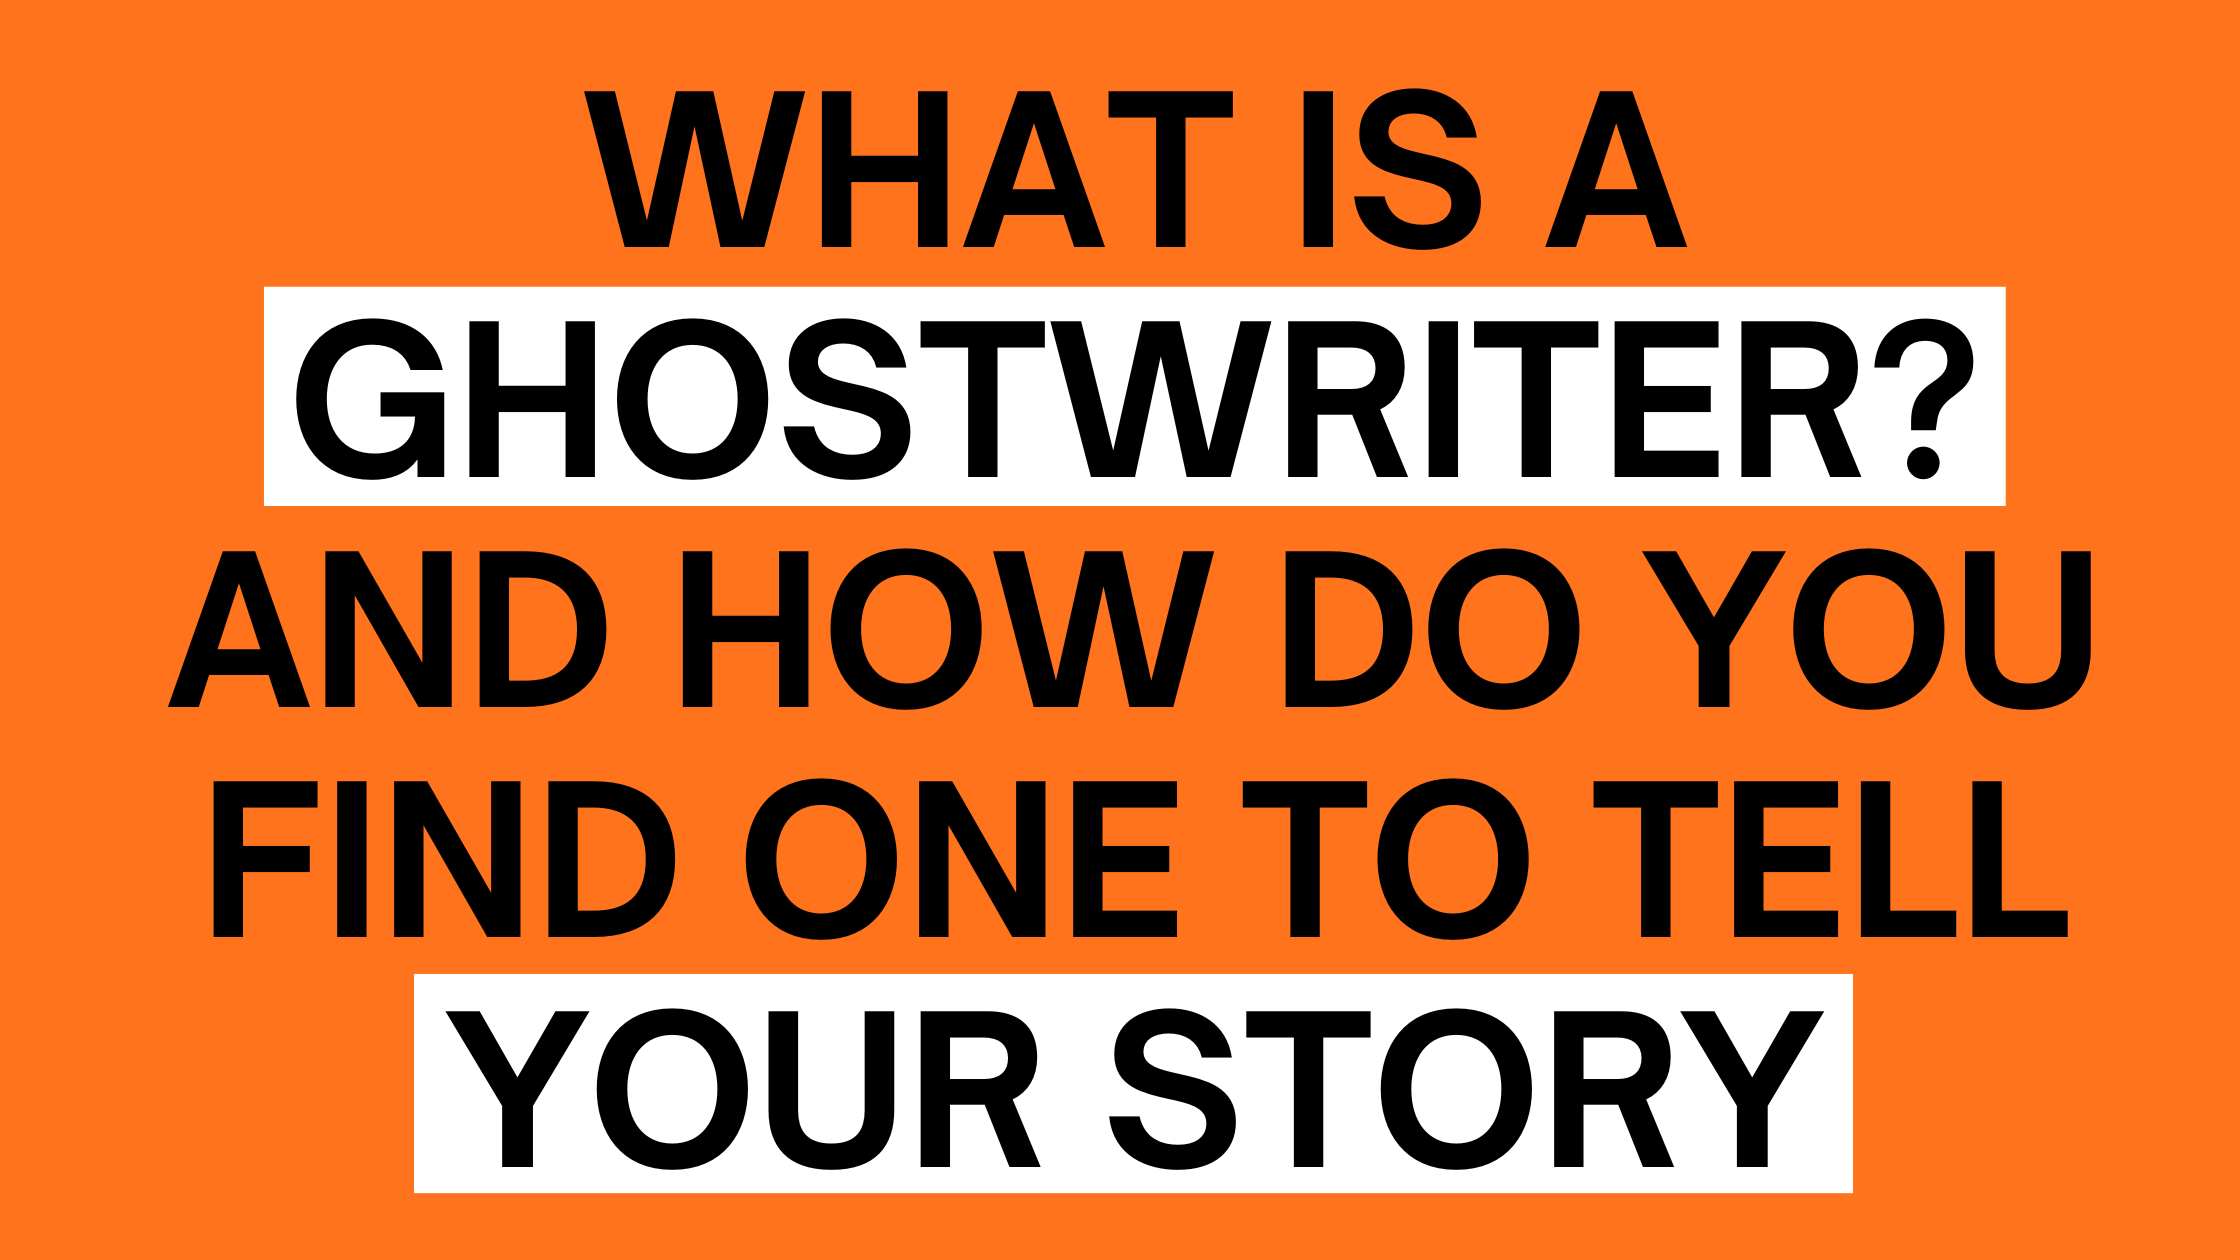 What is a ghostwriter